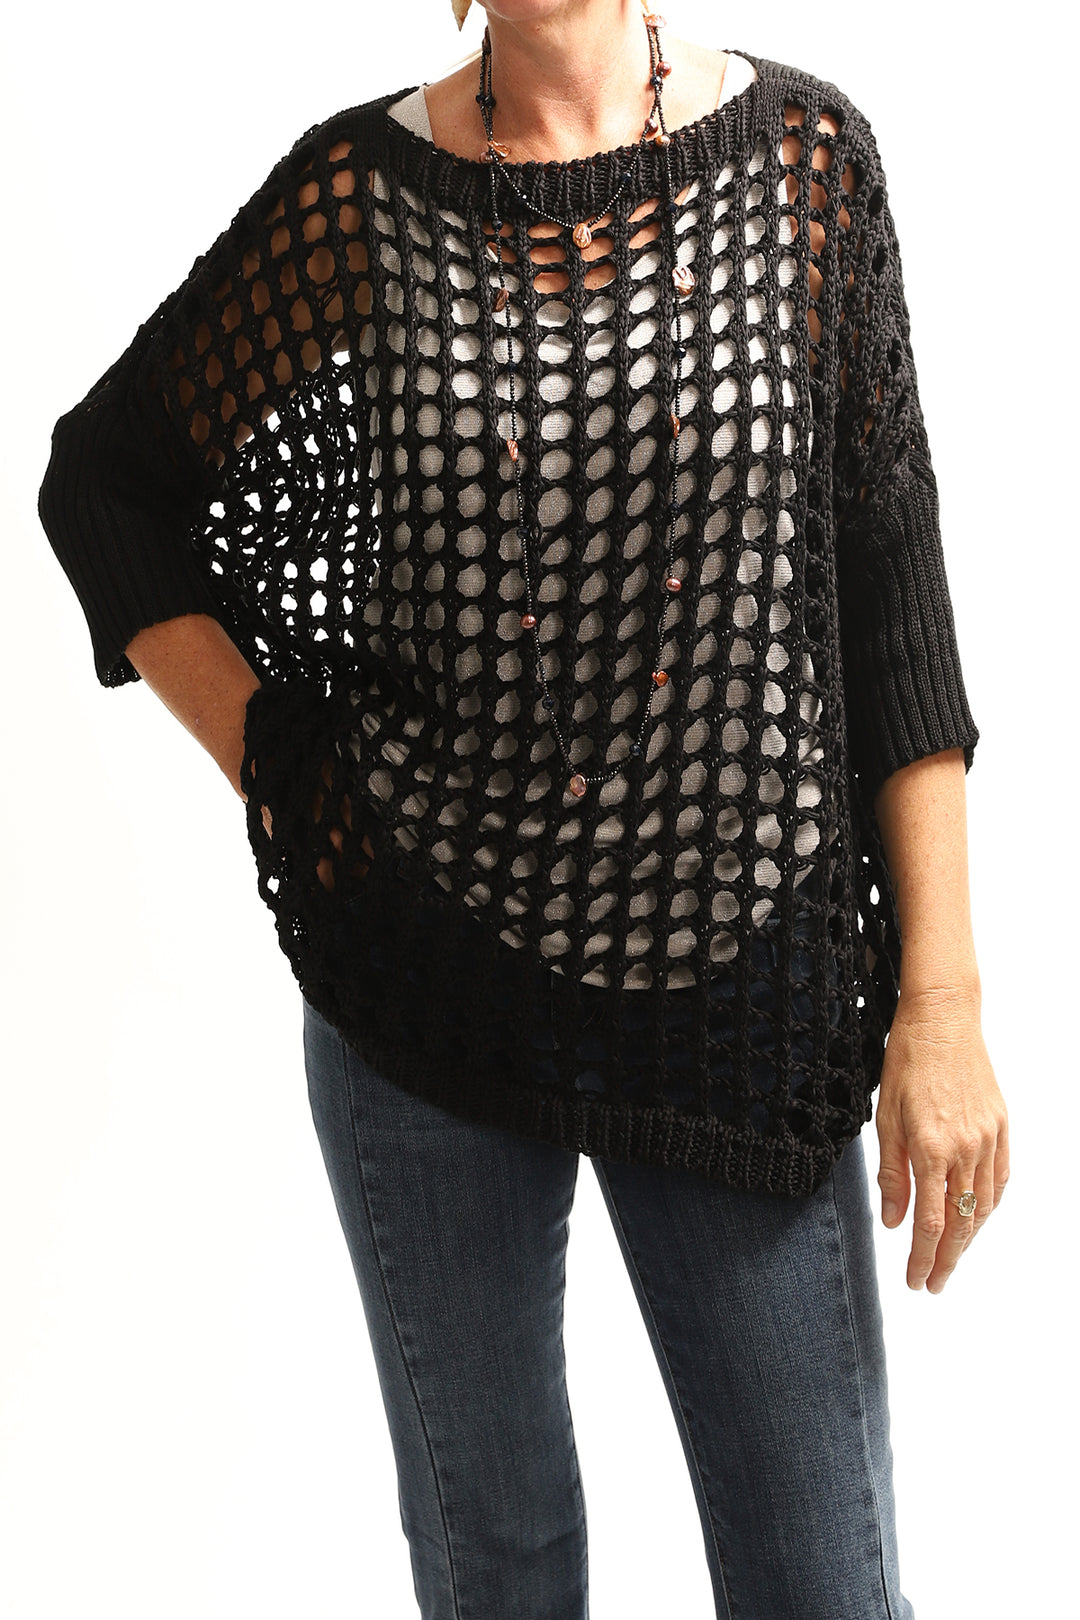 Boho crochet black top by Cindy-G, sold and shipped from Pizazz Boutique Nelson Bay women's dresses online Australia